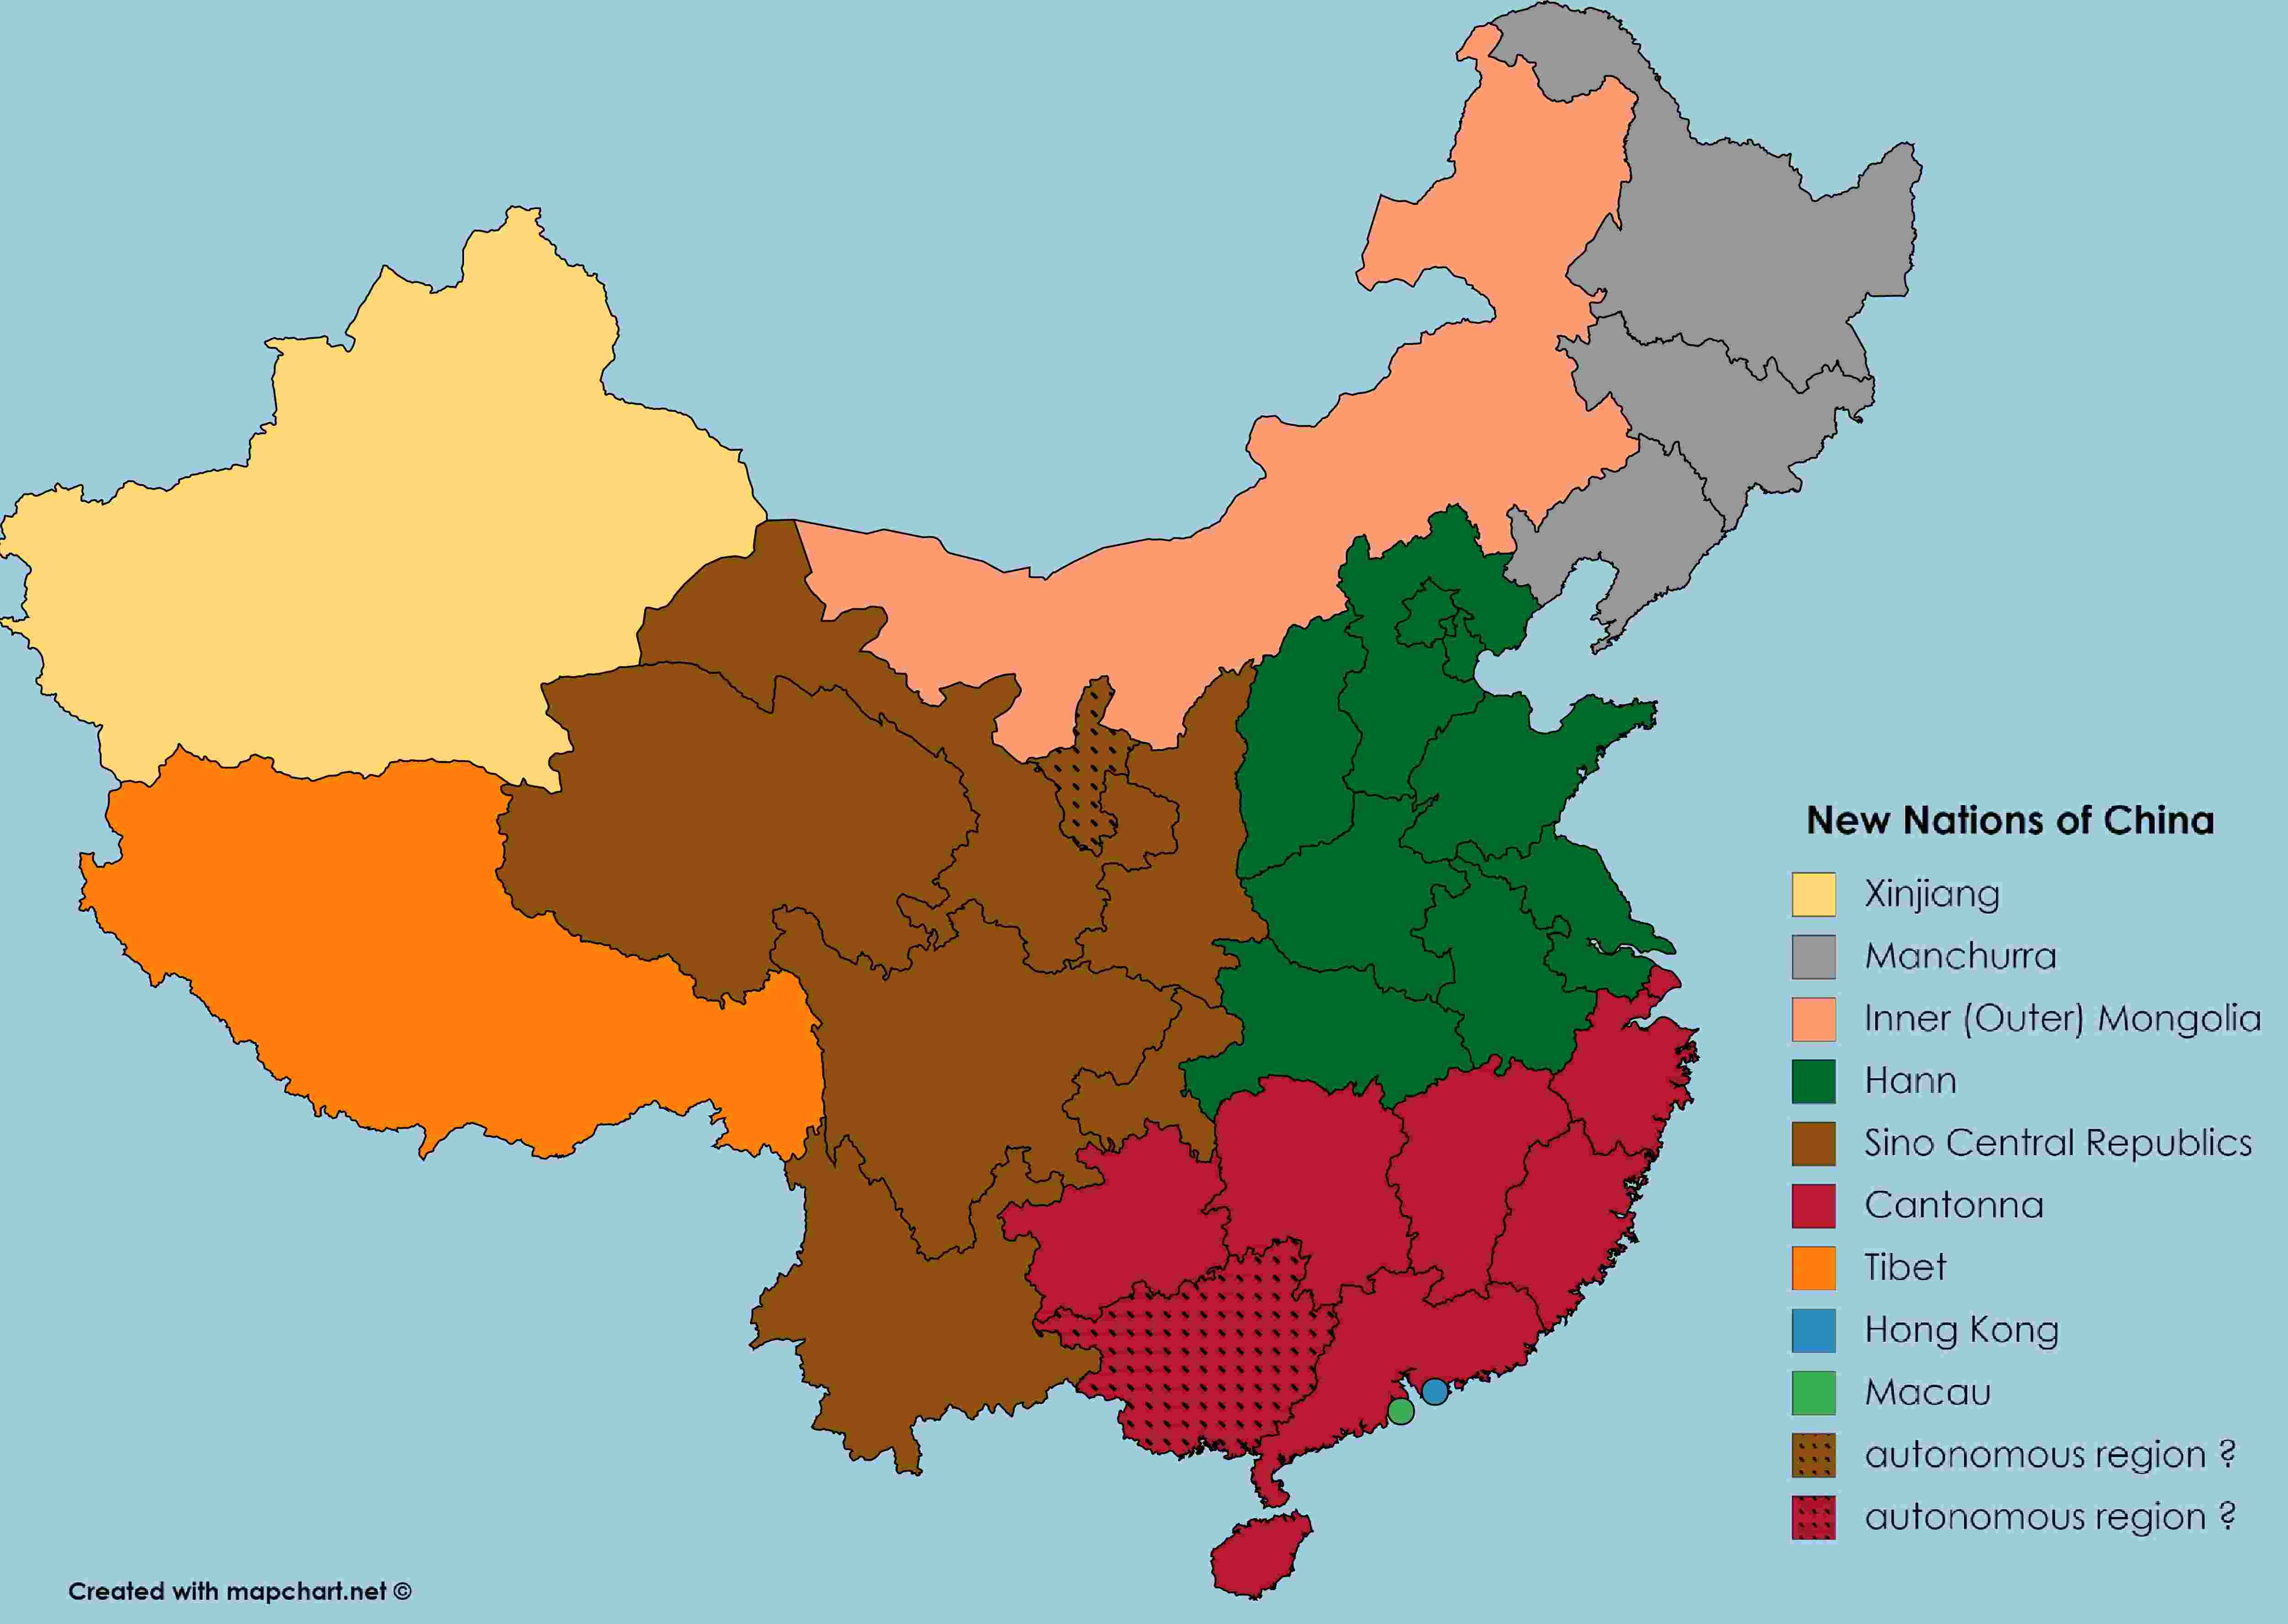 'New Nations of China' Map with color key